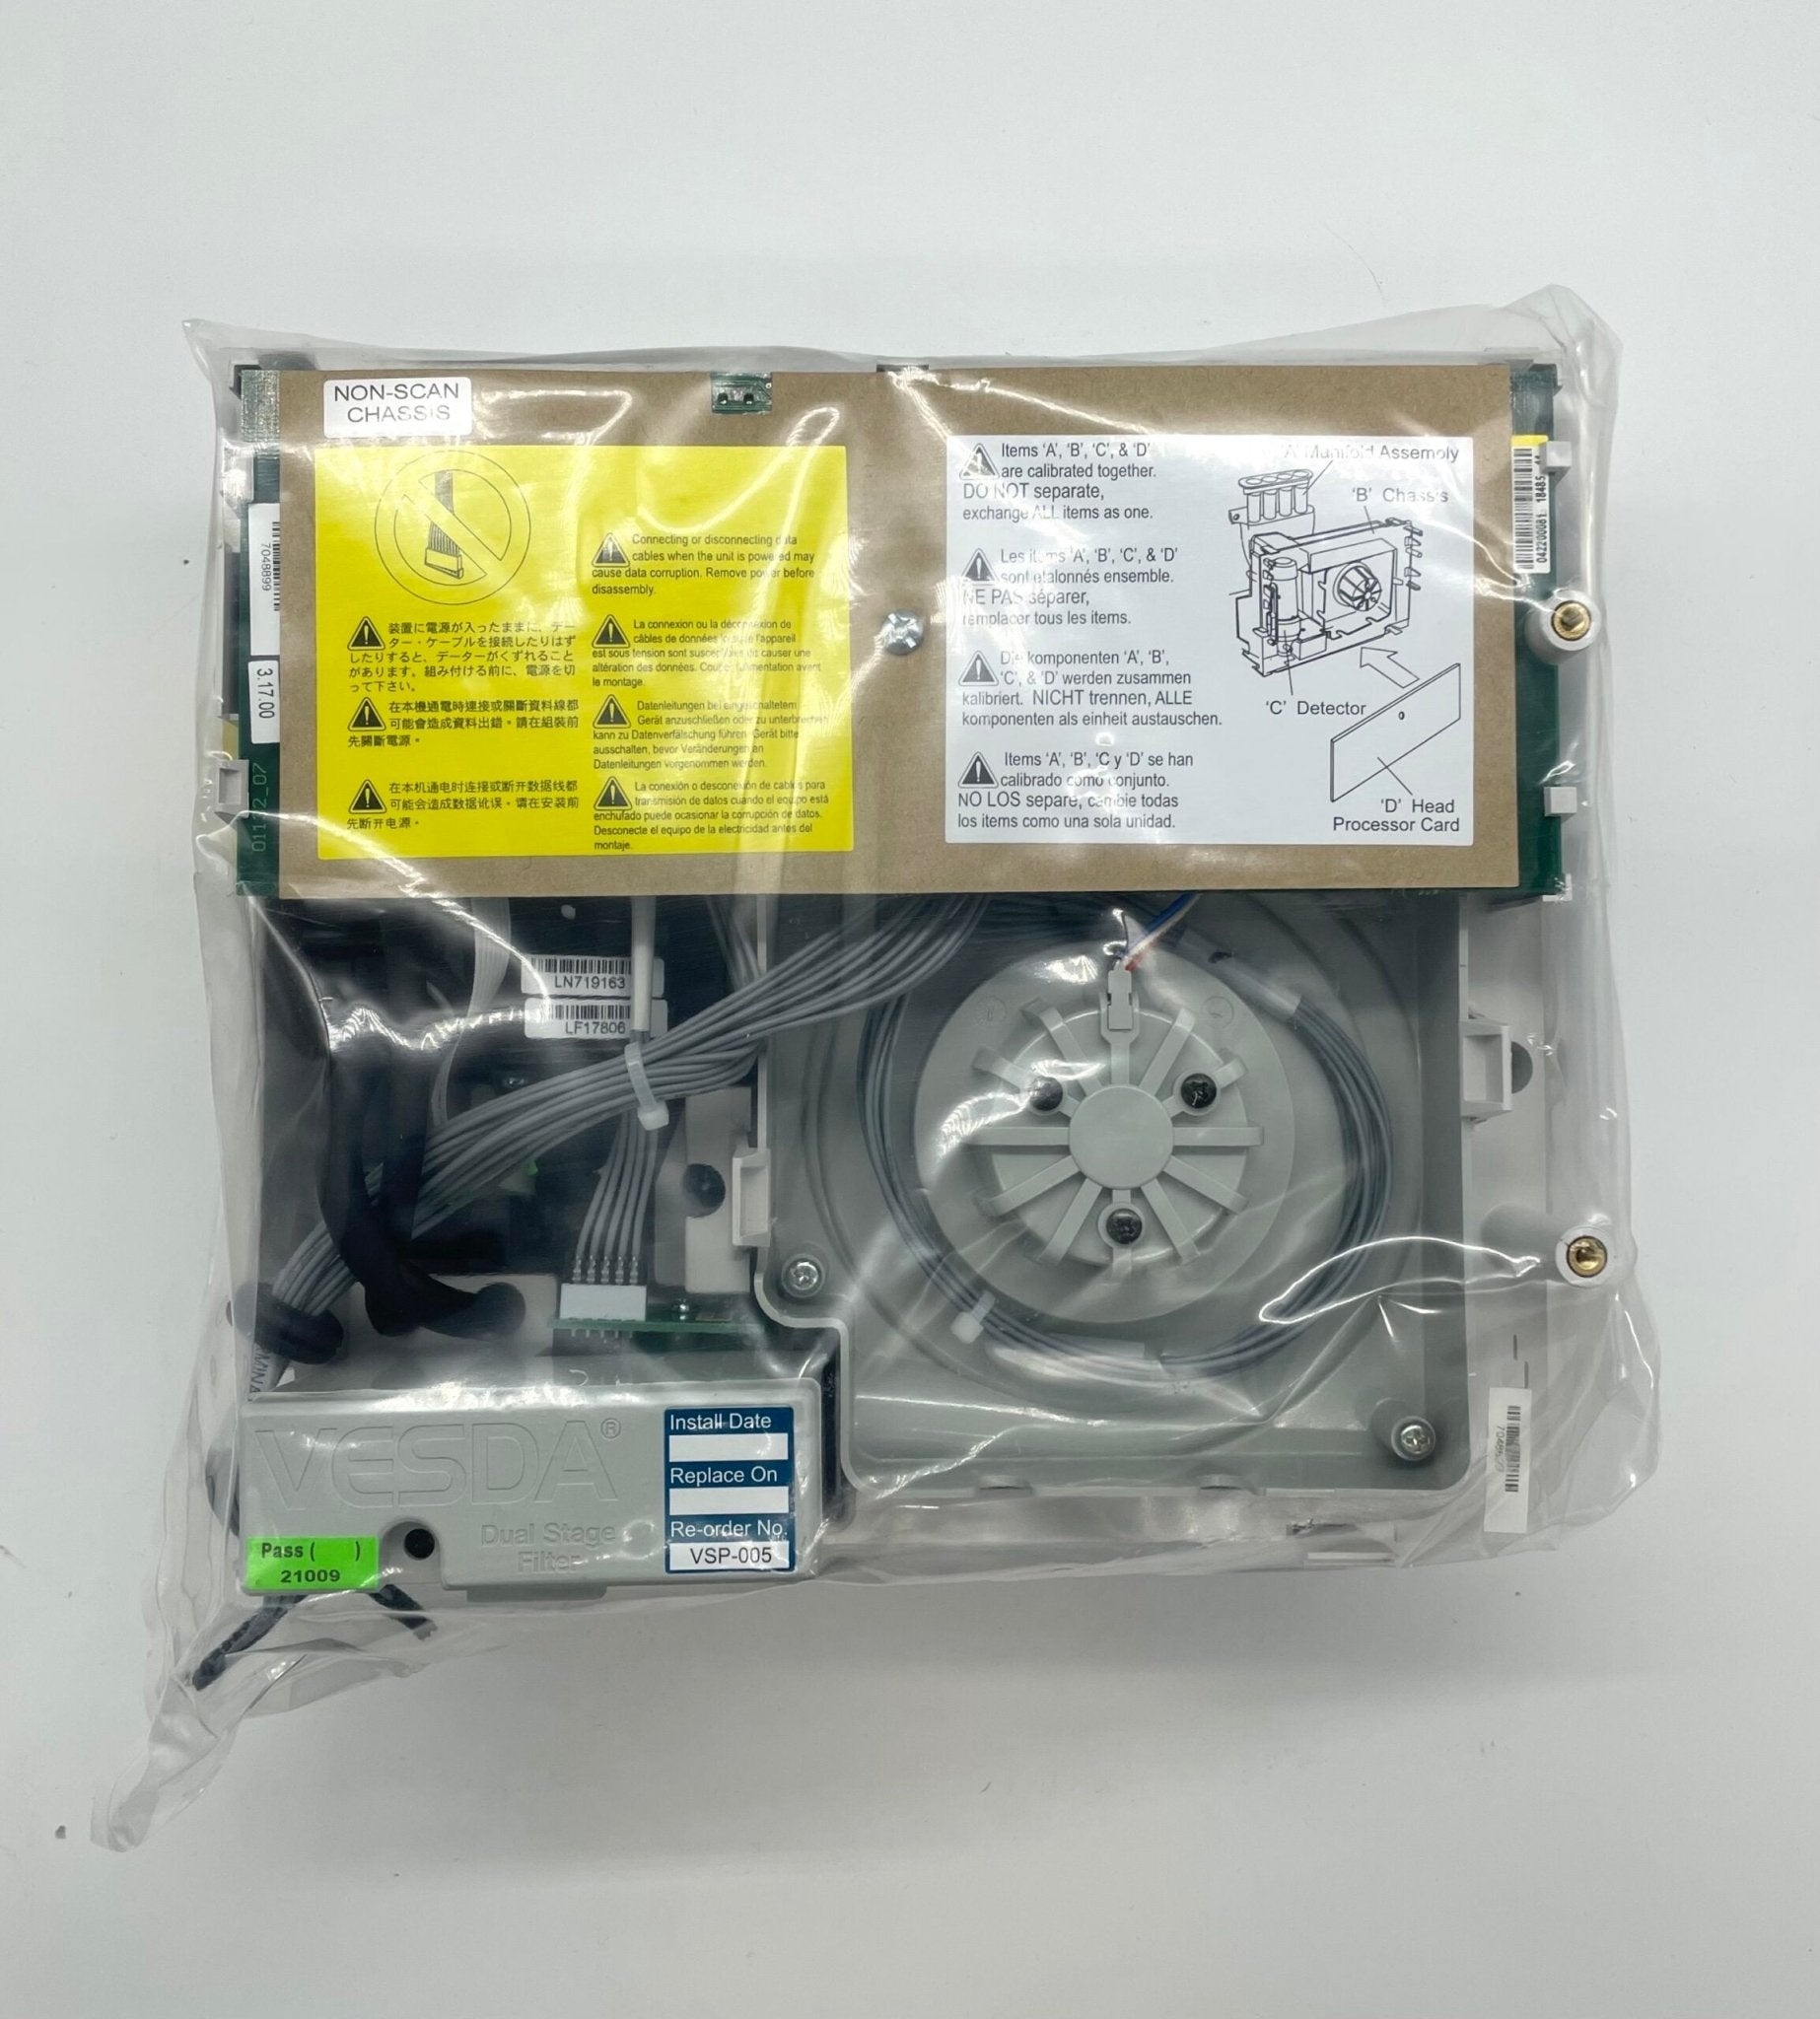 Vesda VSP-006 VLP Main Chassis With Manifold (Discontinued) - The Fire Alarm Supplier